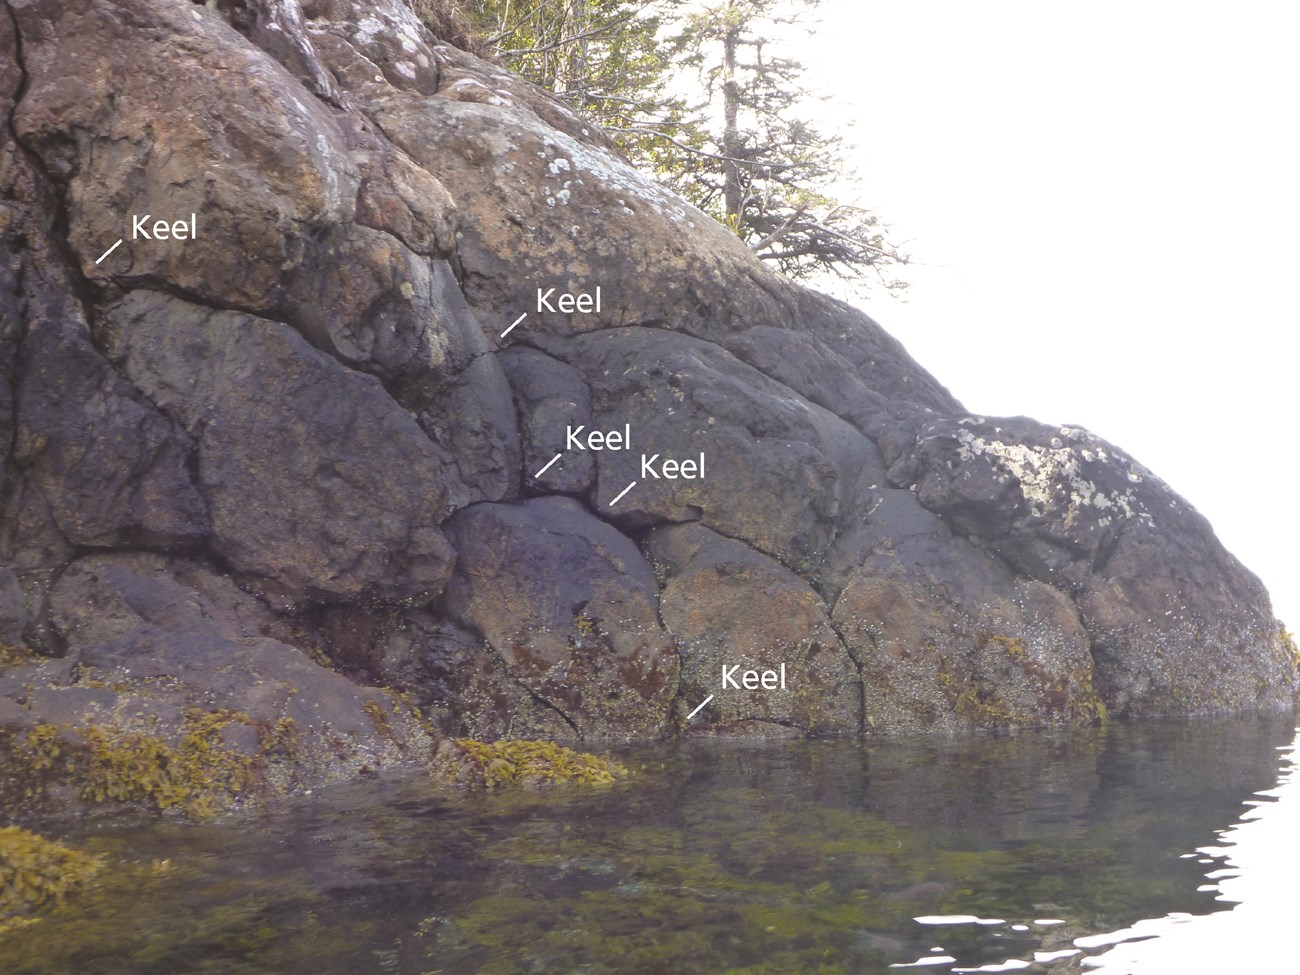 Photo of a rock cliff along a shoreline with rounded pillow basalts exposed and labels for the keels where three pillows meet.